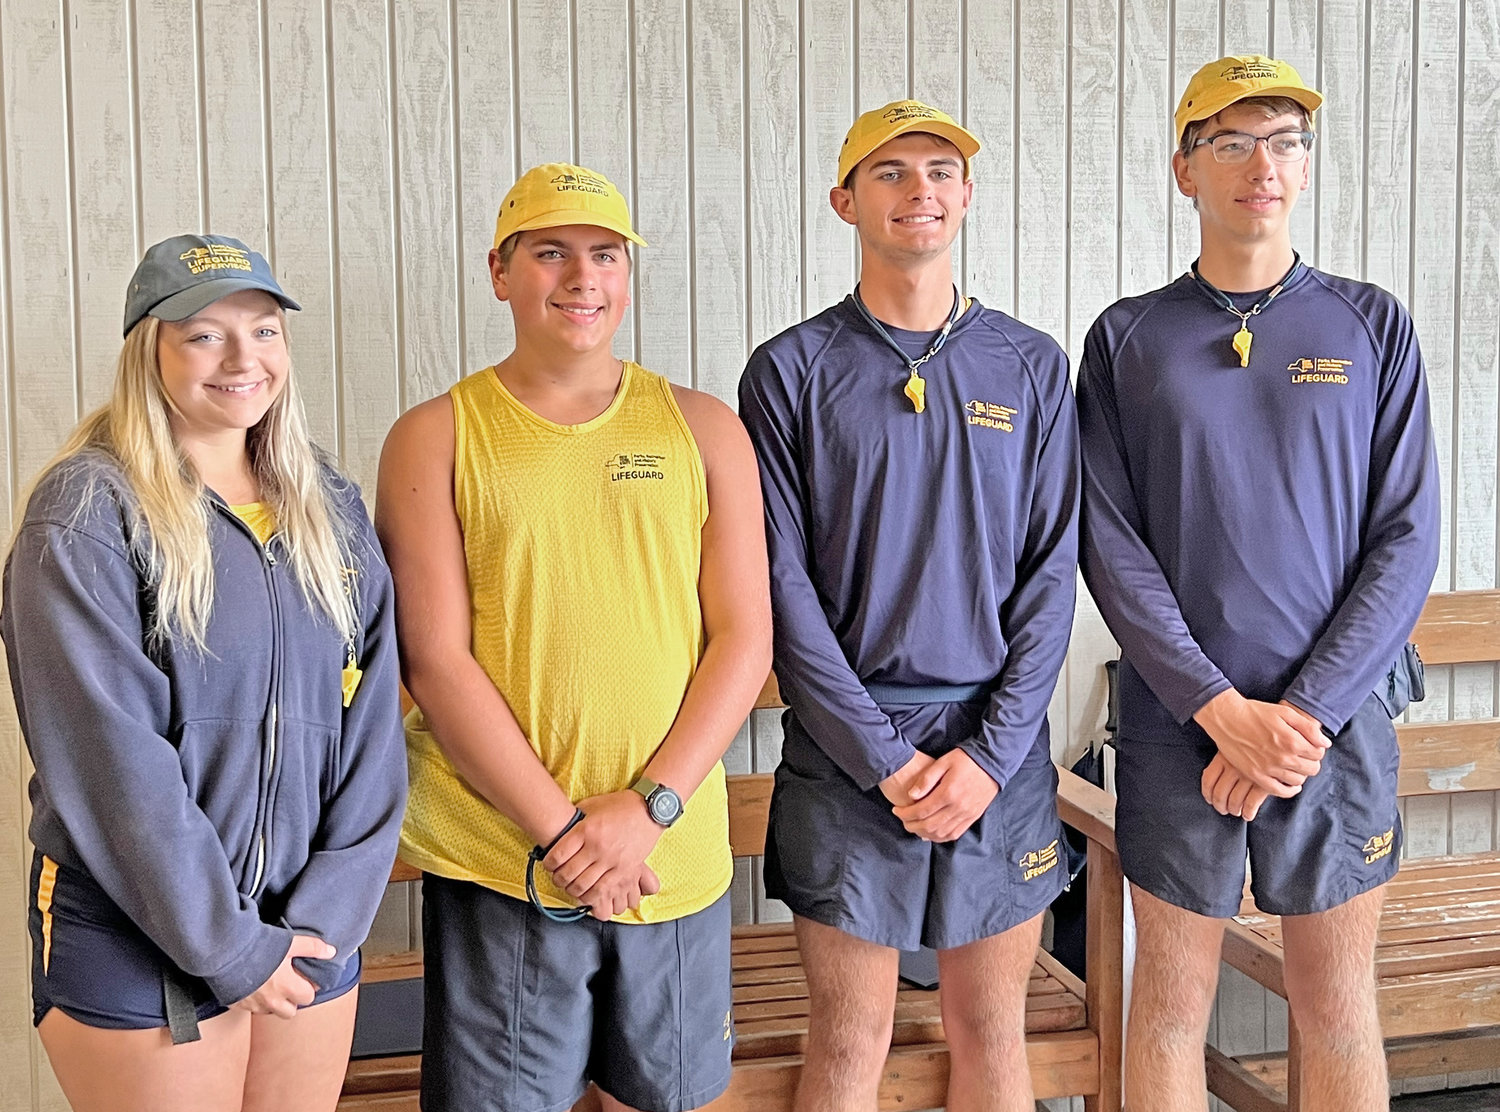 Four young lifeguards who were honored on Monday for helping save the life of an unresponsive 11-month-old infant at Lake Delta State Park. From left: Olivia Smith, Michael Corr, Gavin Civitelli and Dennis VanHoesel.